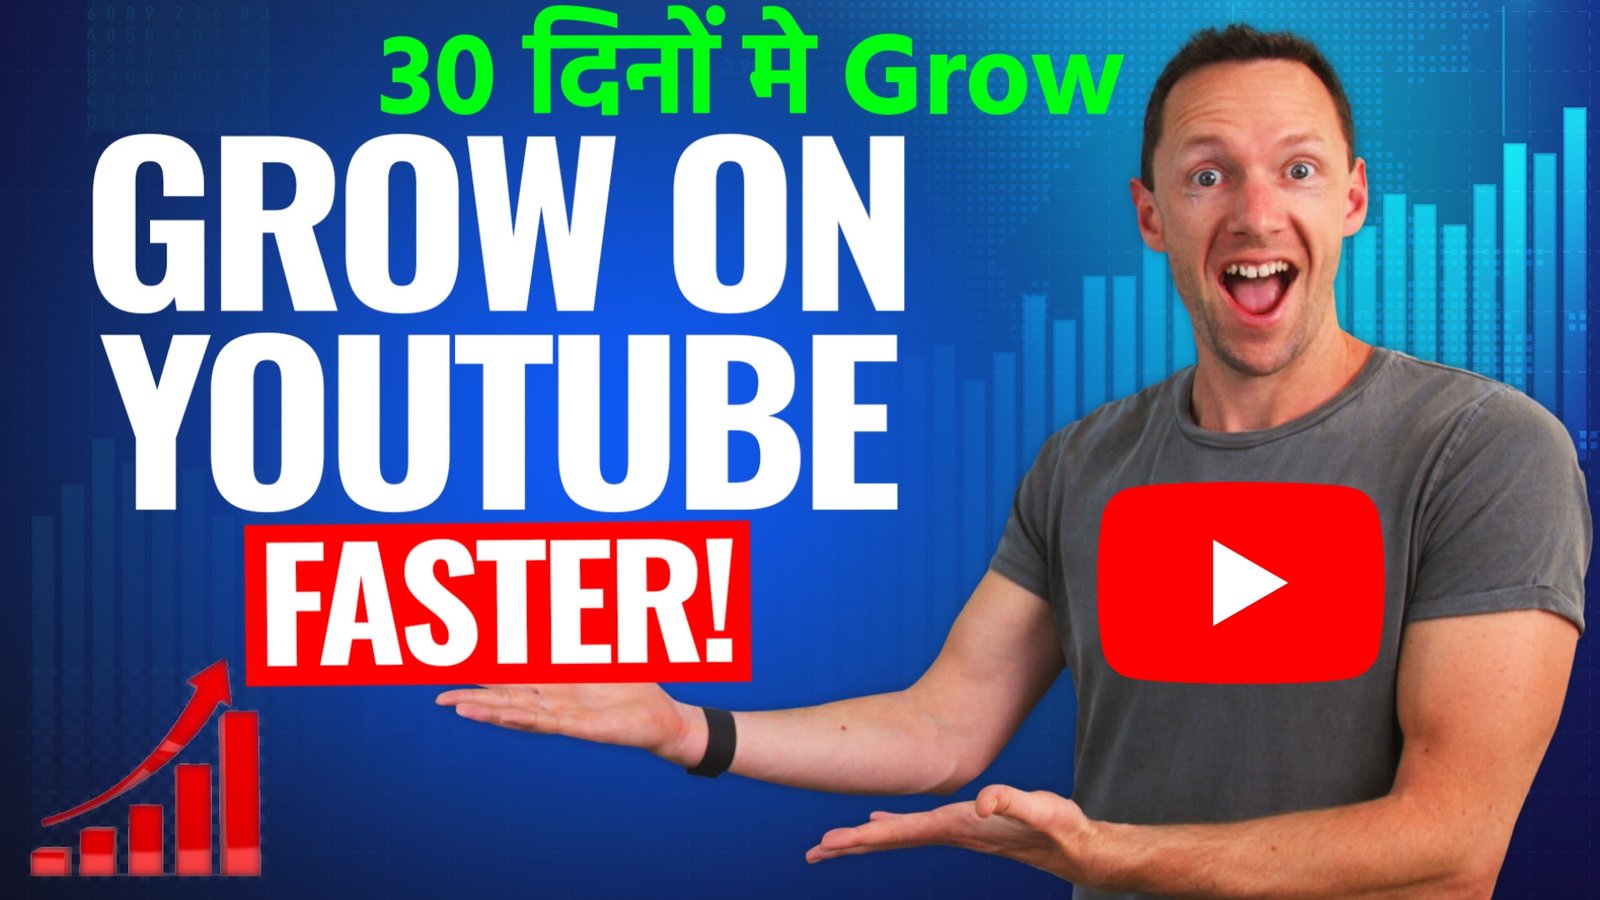 How to grow in YouTube channel 